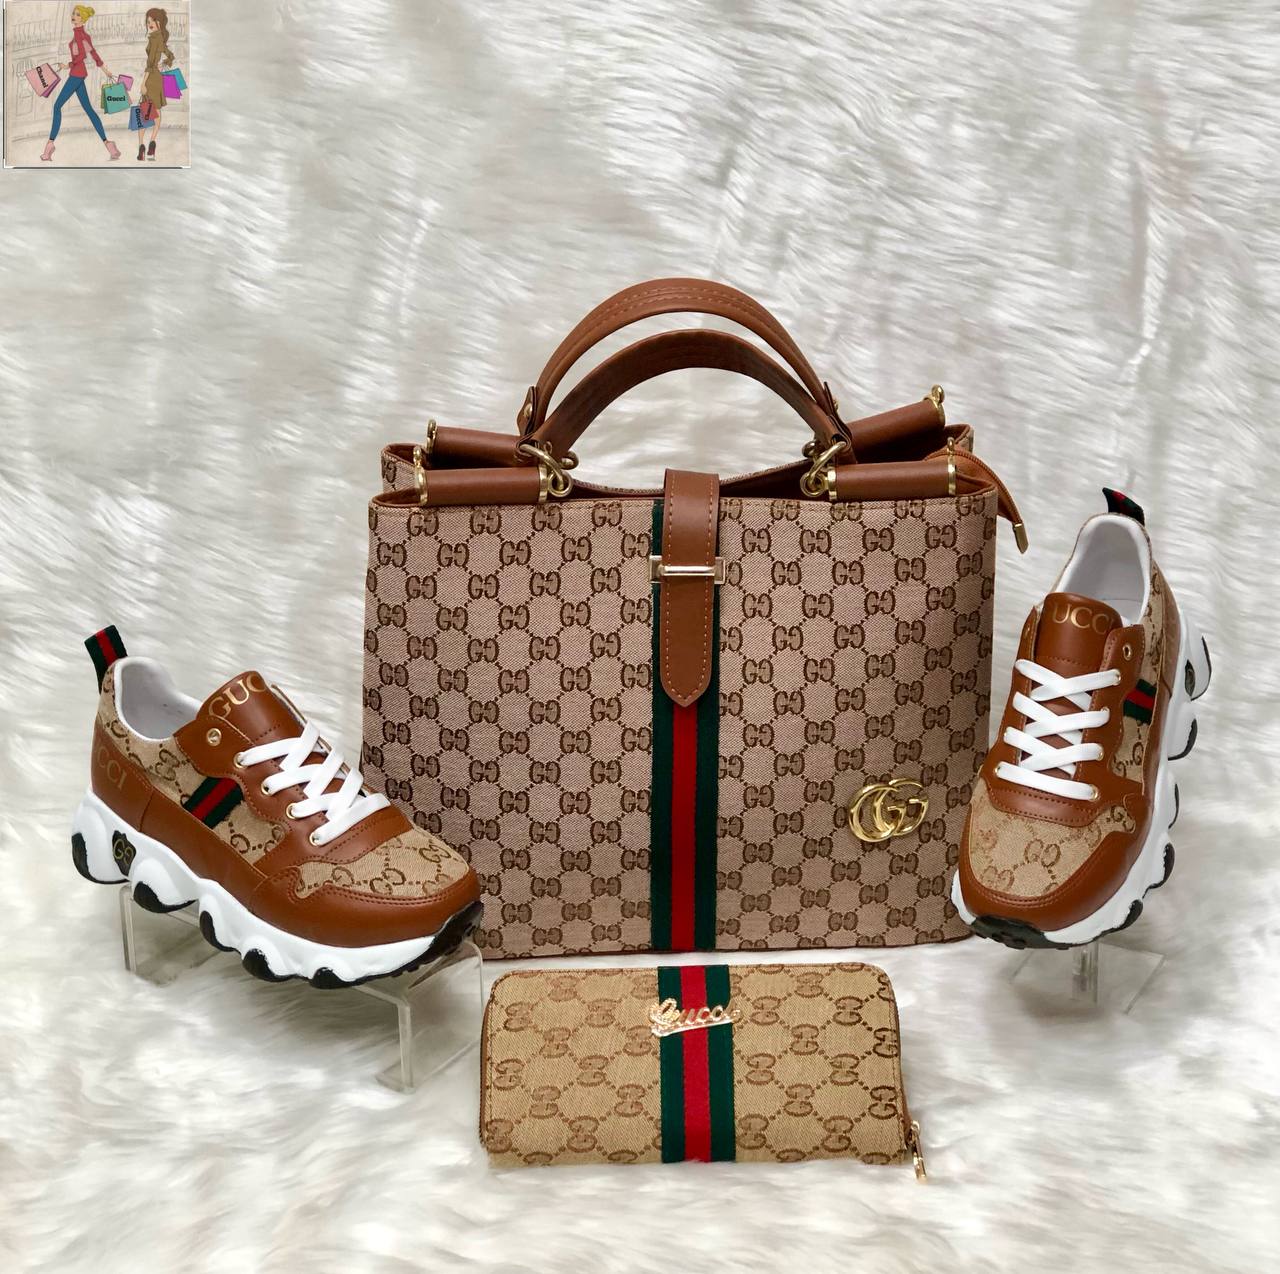 Gucci sneakers and handbags with wallet